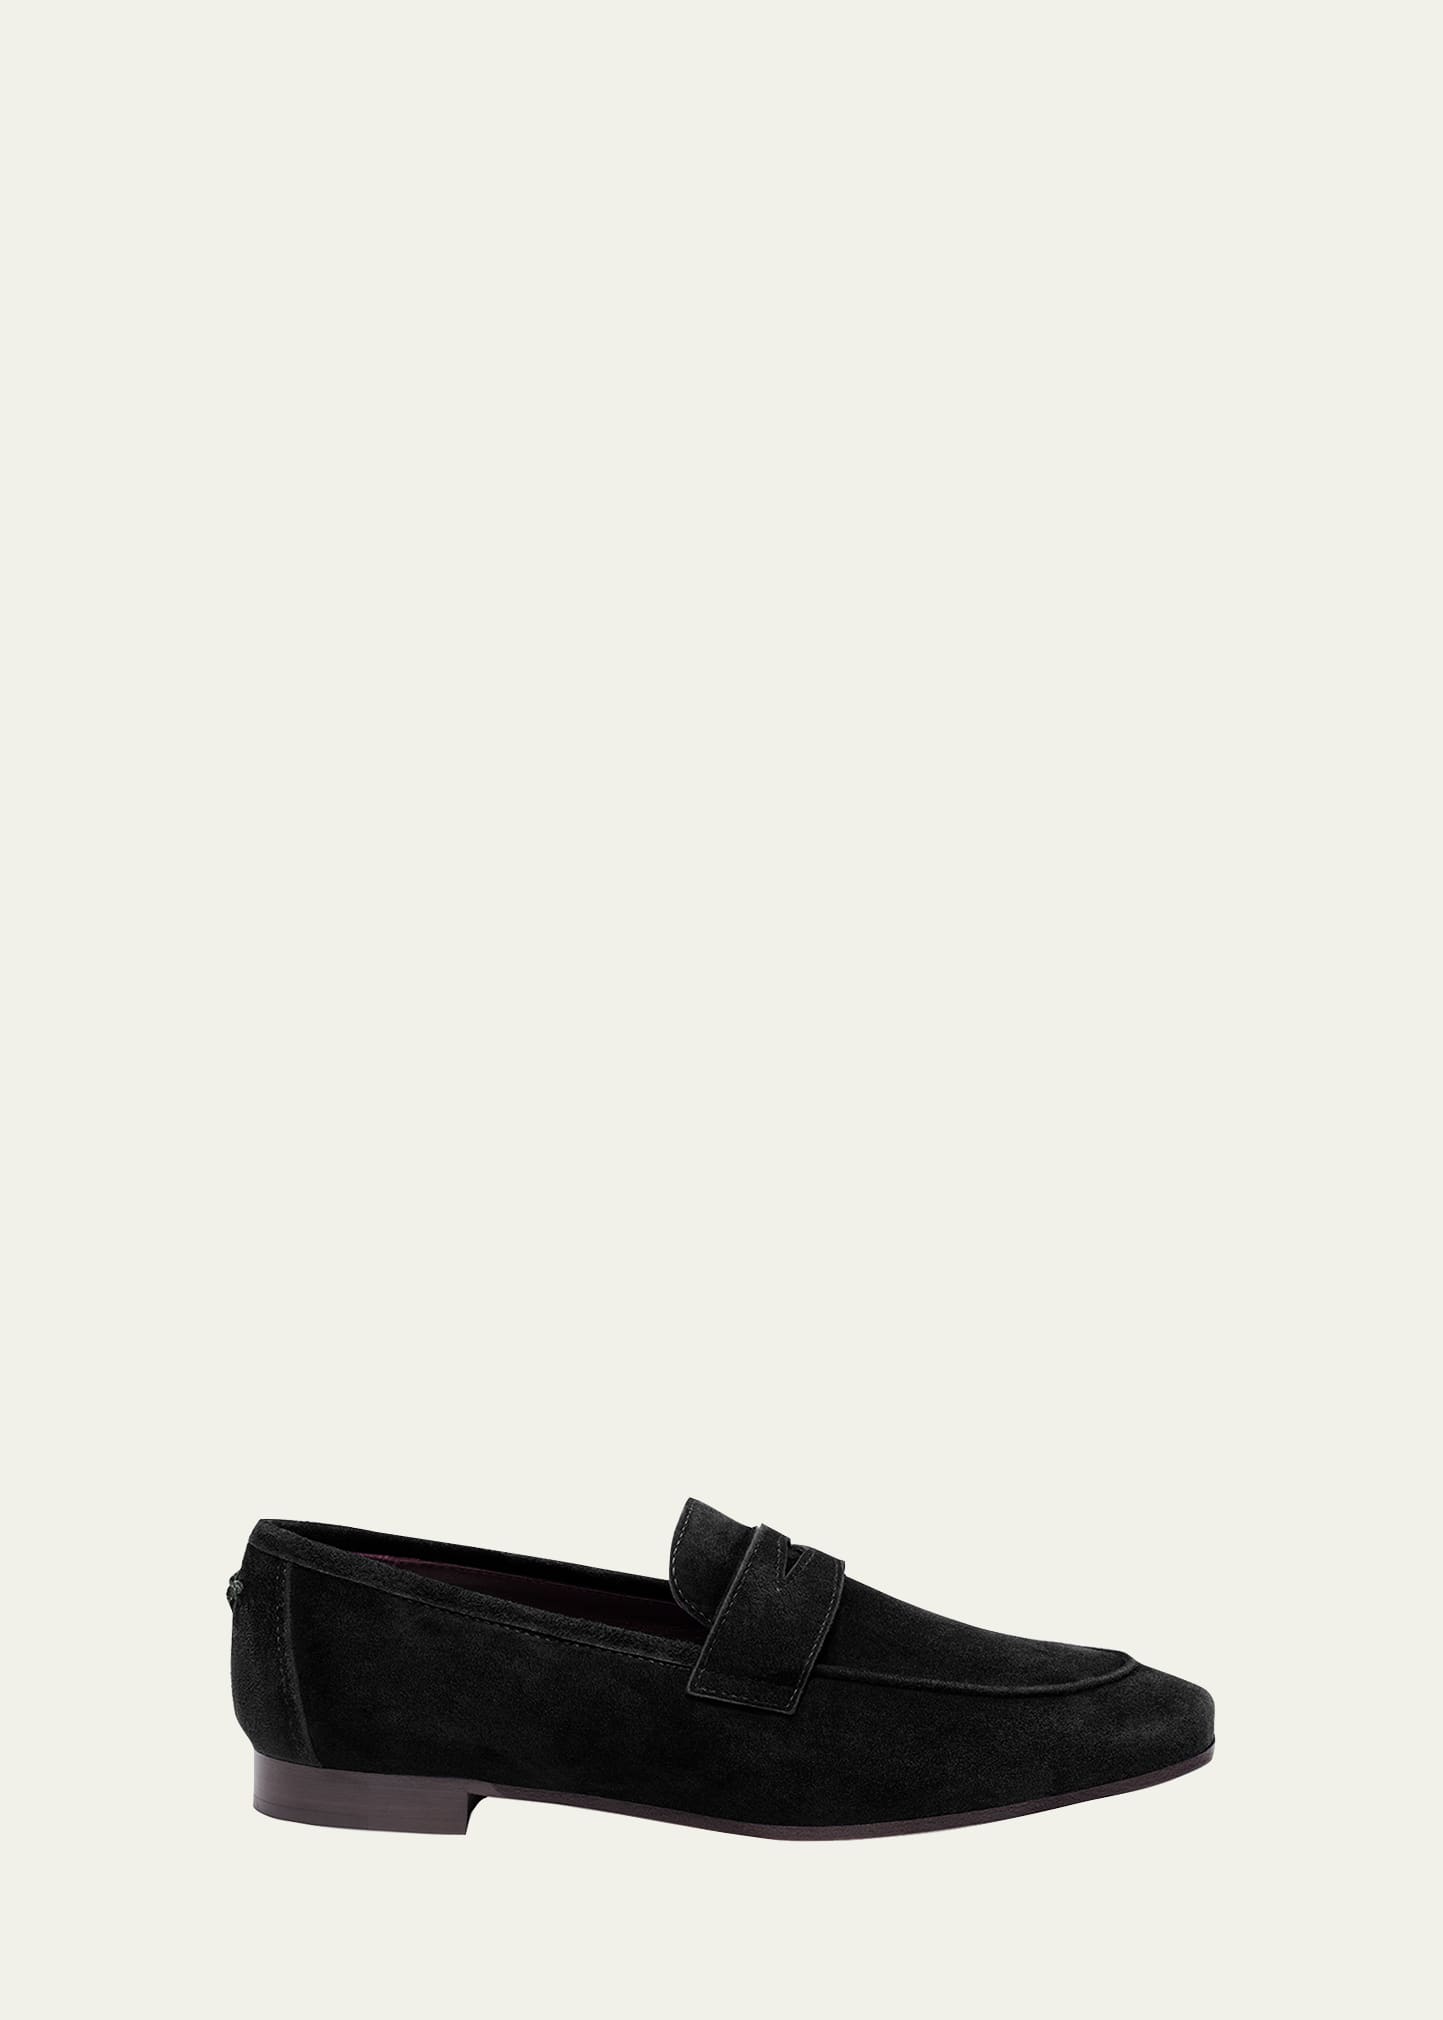 Bougeotte Suede Slip-On Penny Loafer